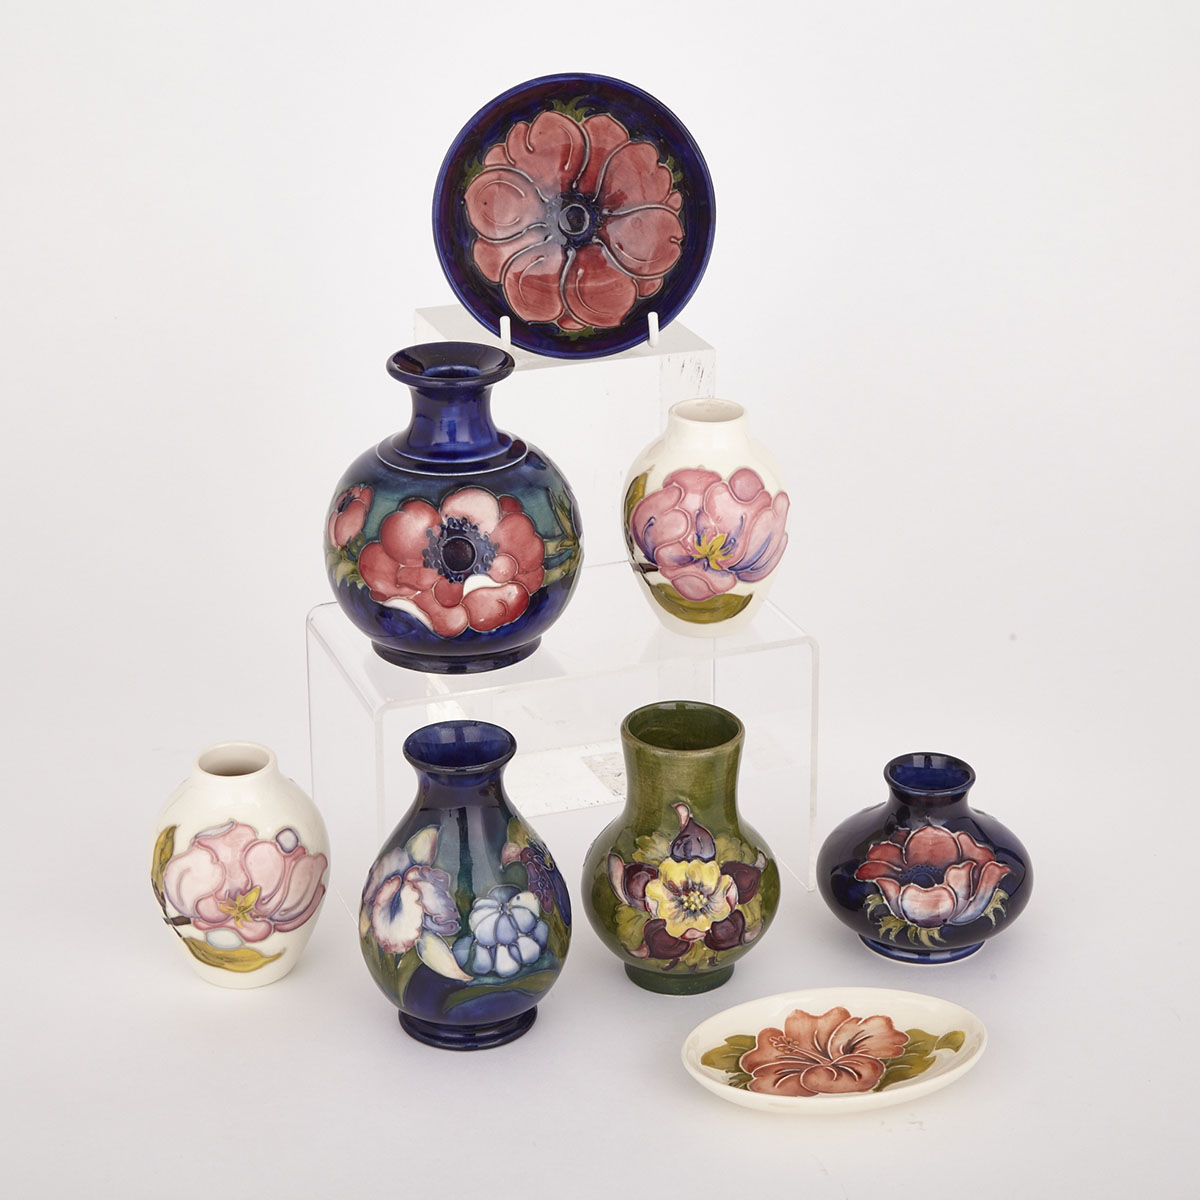 Group of Five Moorcroft Vases, Two Dishes and a Scent Bottle, 20th century